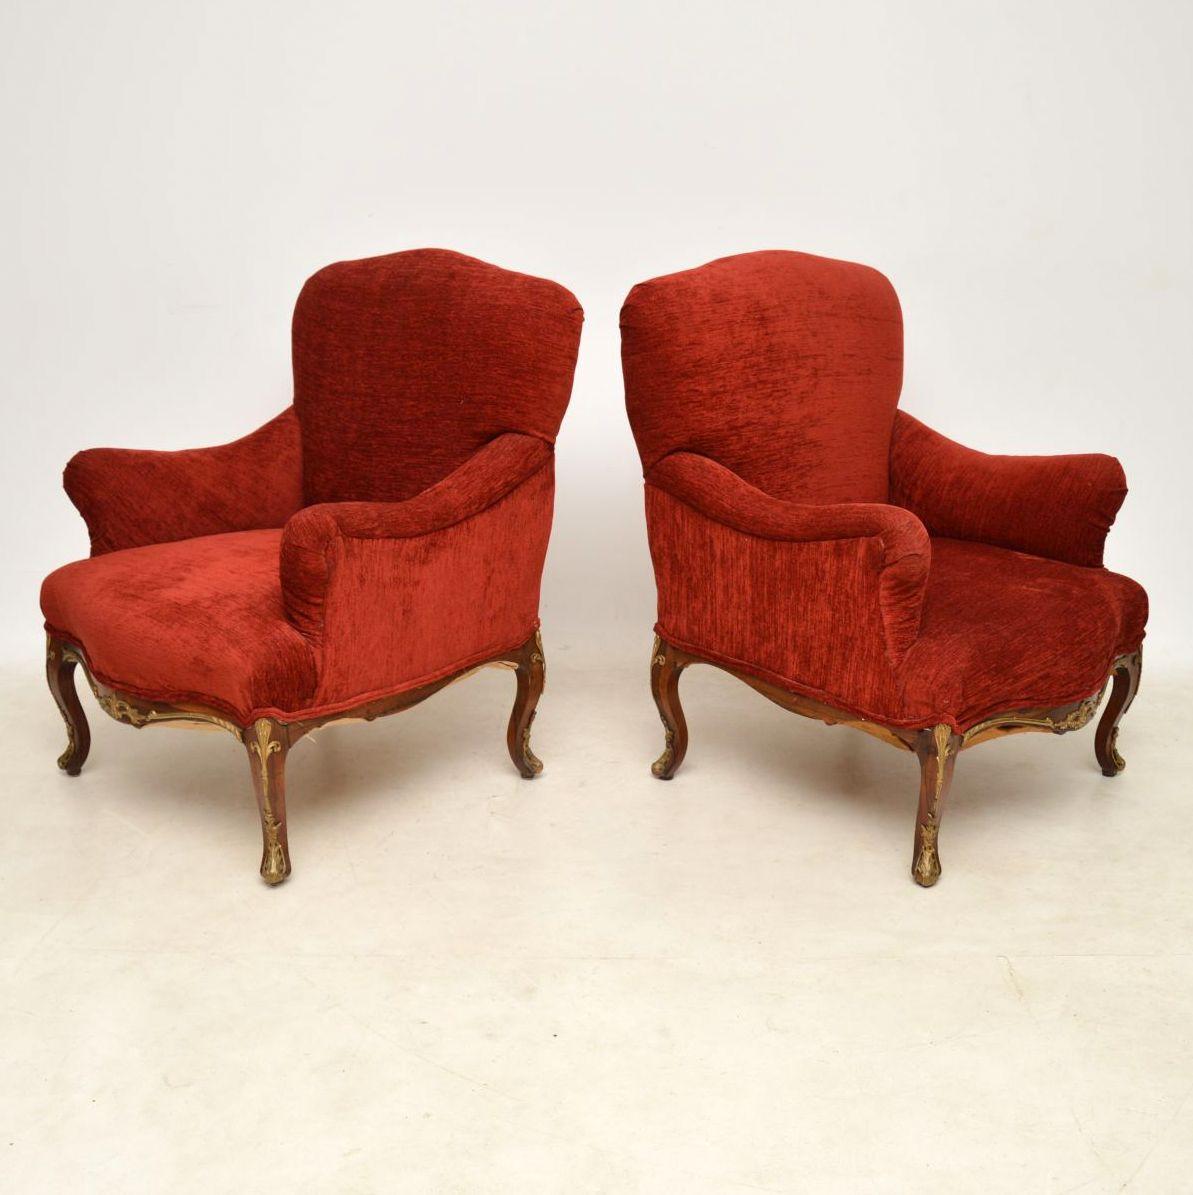 Fabulous pair of antique fully upholstered armchairs with rosewood legs that have applied gilt bronze mounts. They are wonderful quality and still have the original crisp horse hair beneath the fabric, which must have been redone quite recently